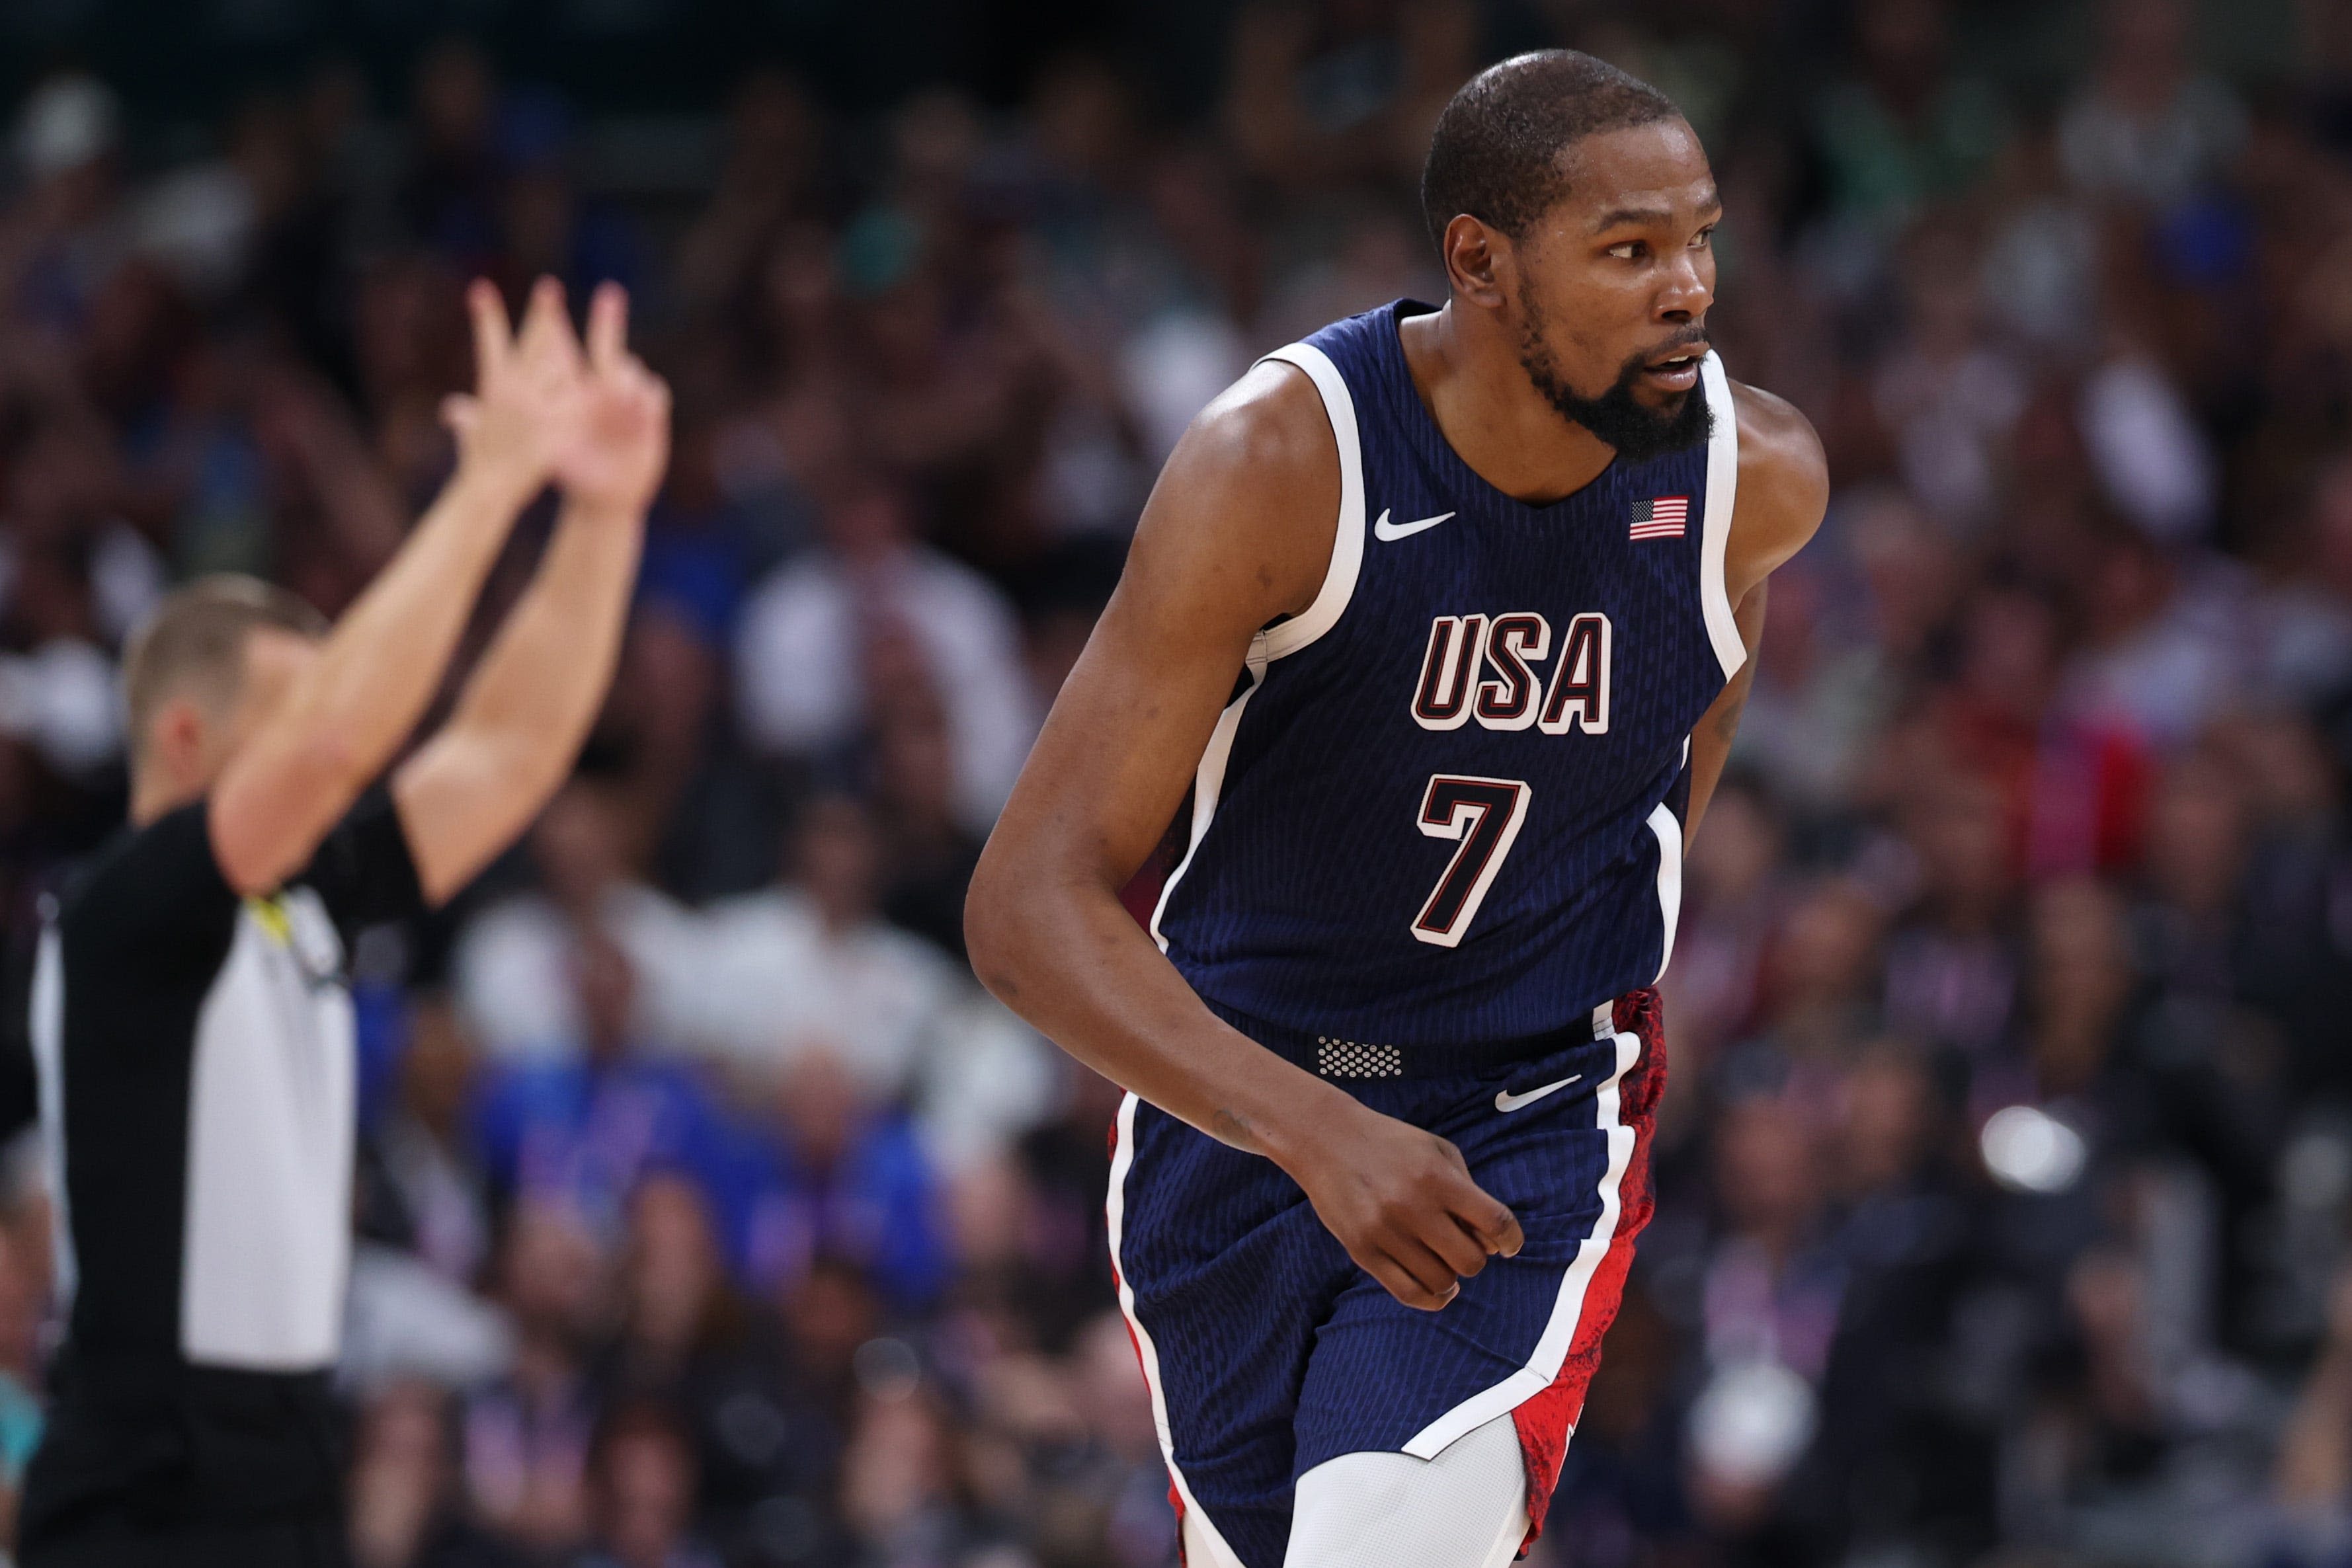 Kevin Durant points today: NBA star paces Team USA basketball in Olympics win vs. Serbia